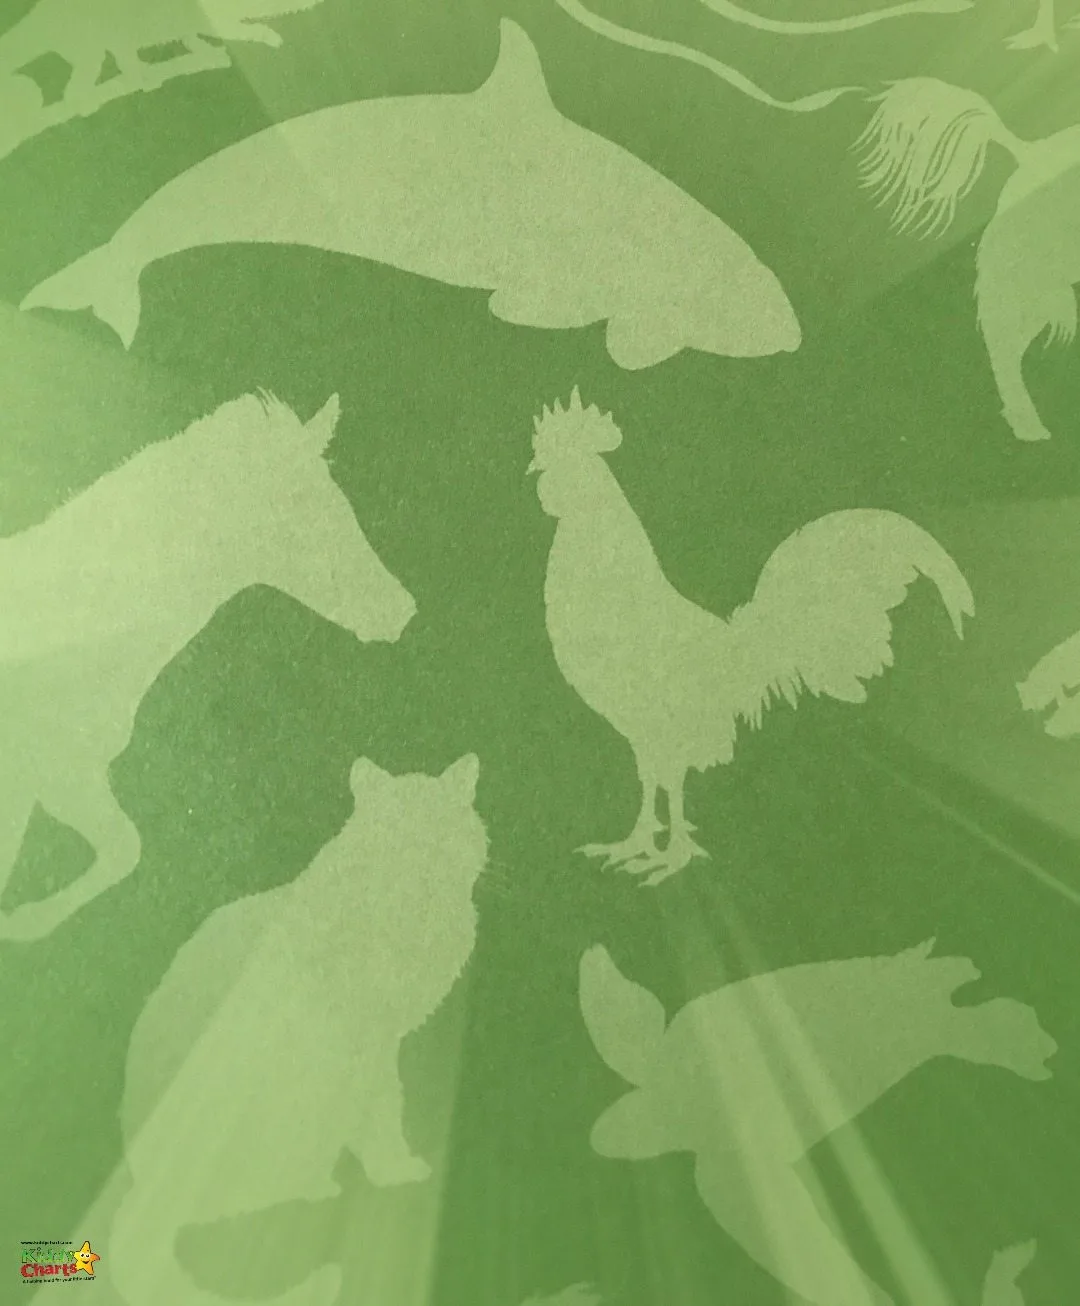 Even the book jacket could make a good wallpaper within the Lonely Planet Kids The Animal Book! ;-)